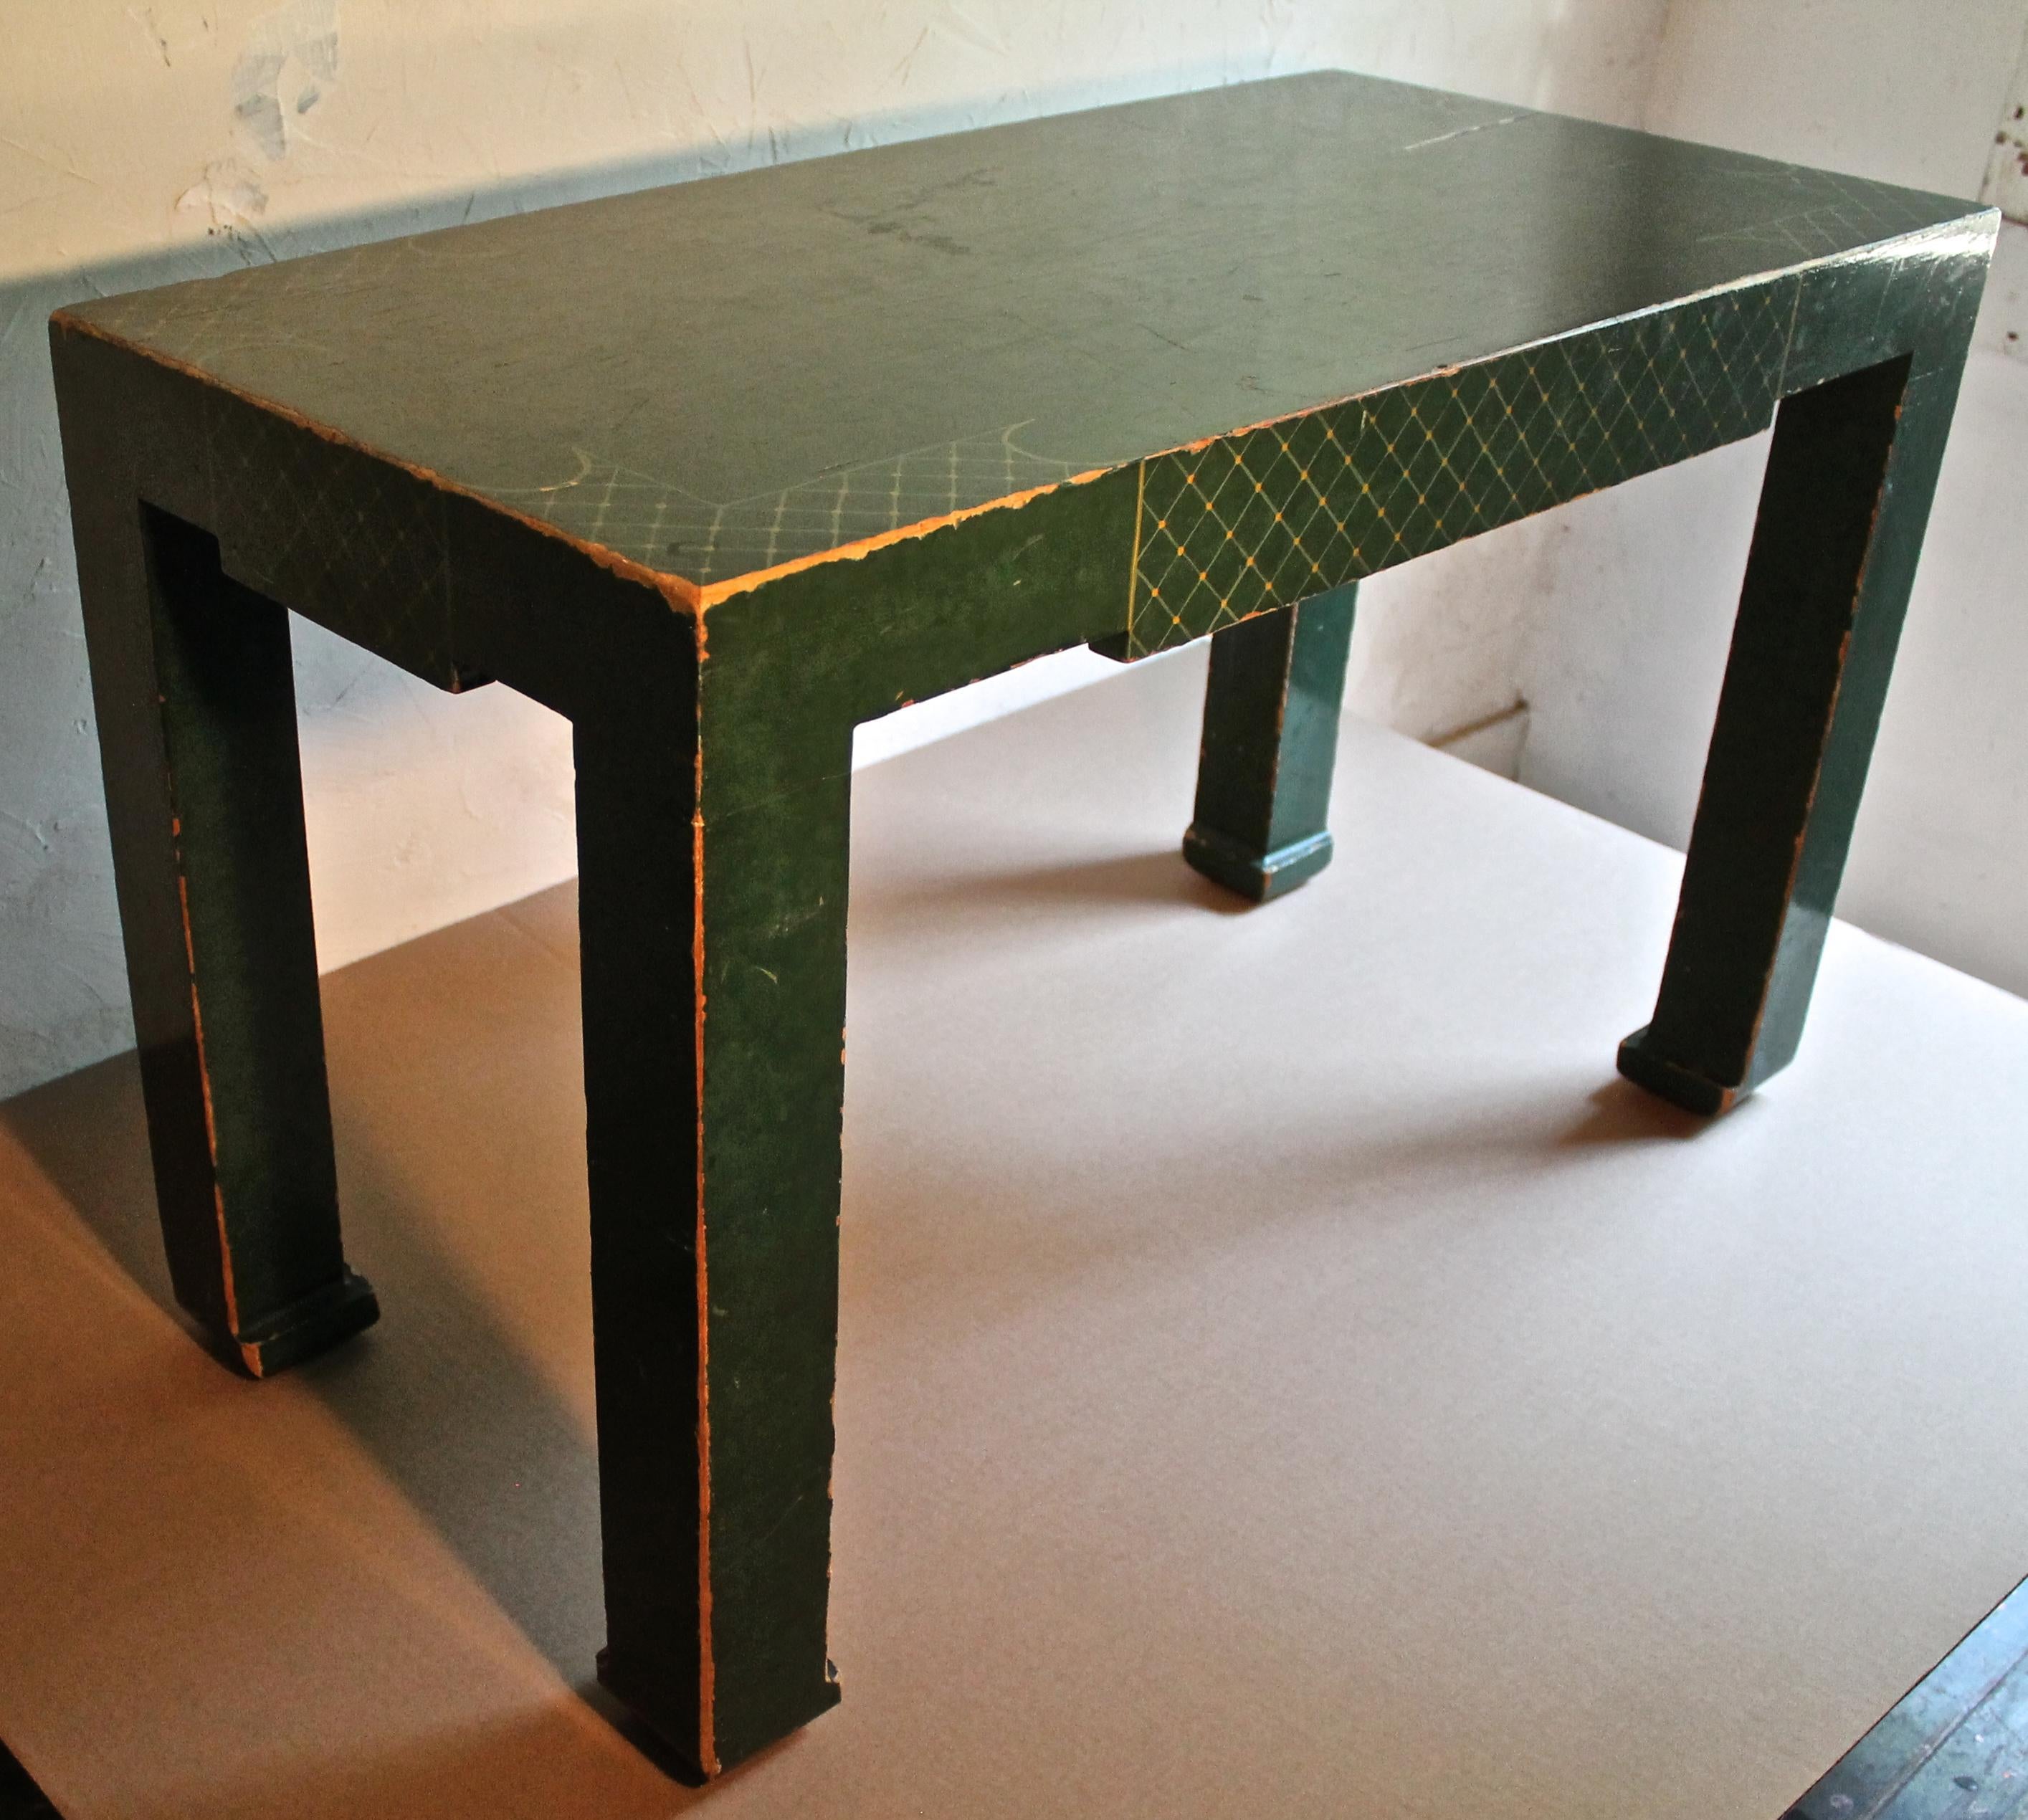 Gold criss crosses over a deep phalo green lacquer. Parsons in form but chinoiserie in detail.